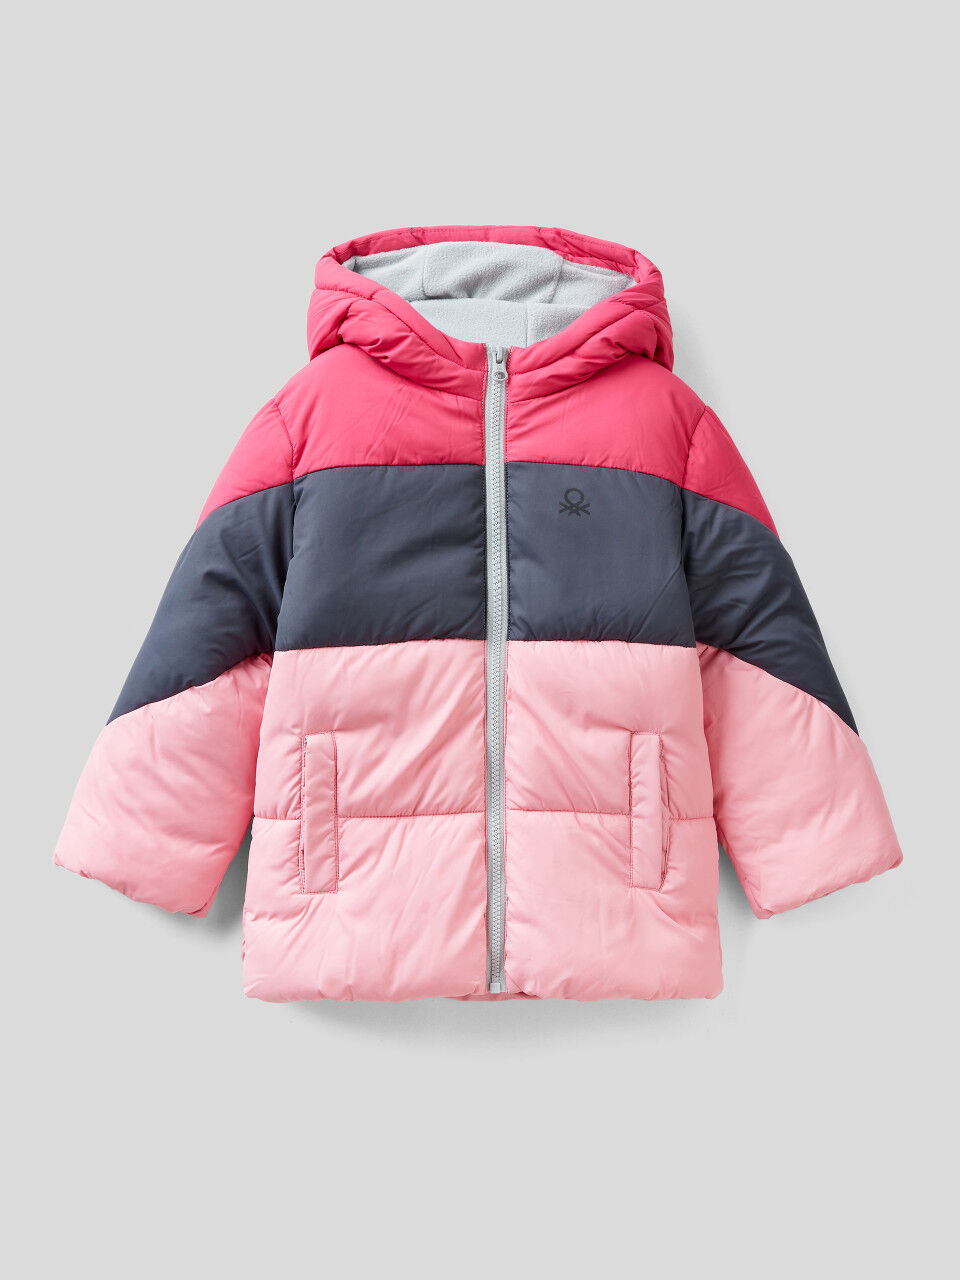 KIDS FASHION Jackets NO STYLE United colors of benetton vest discount 72% Pink 14Y 